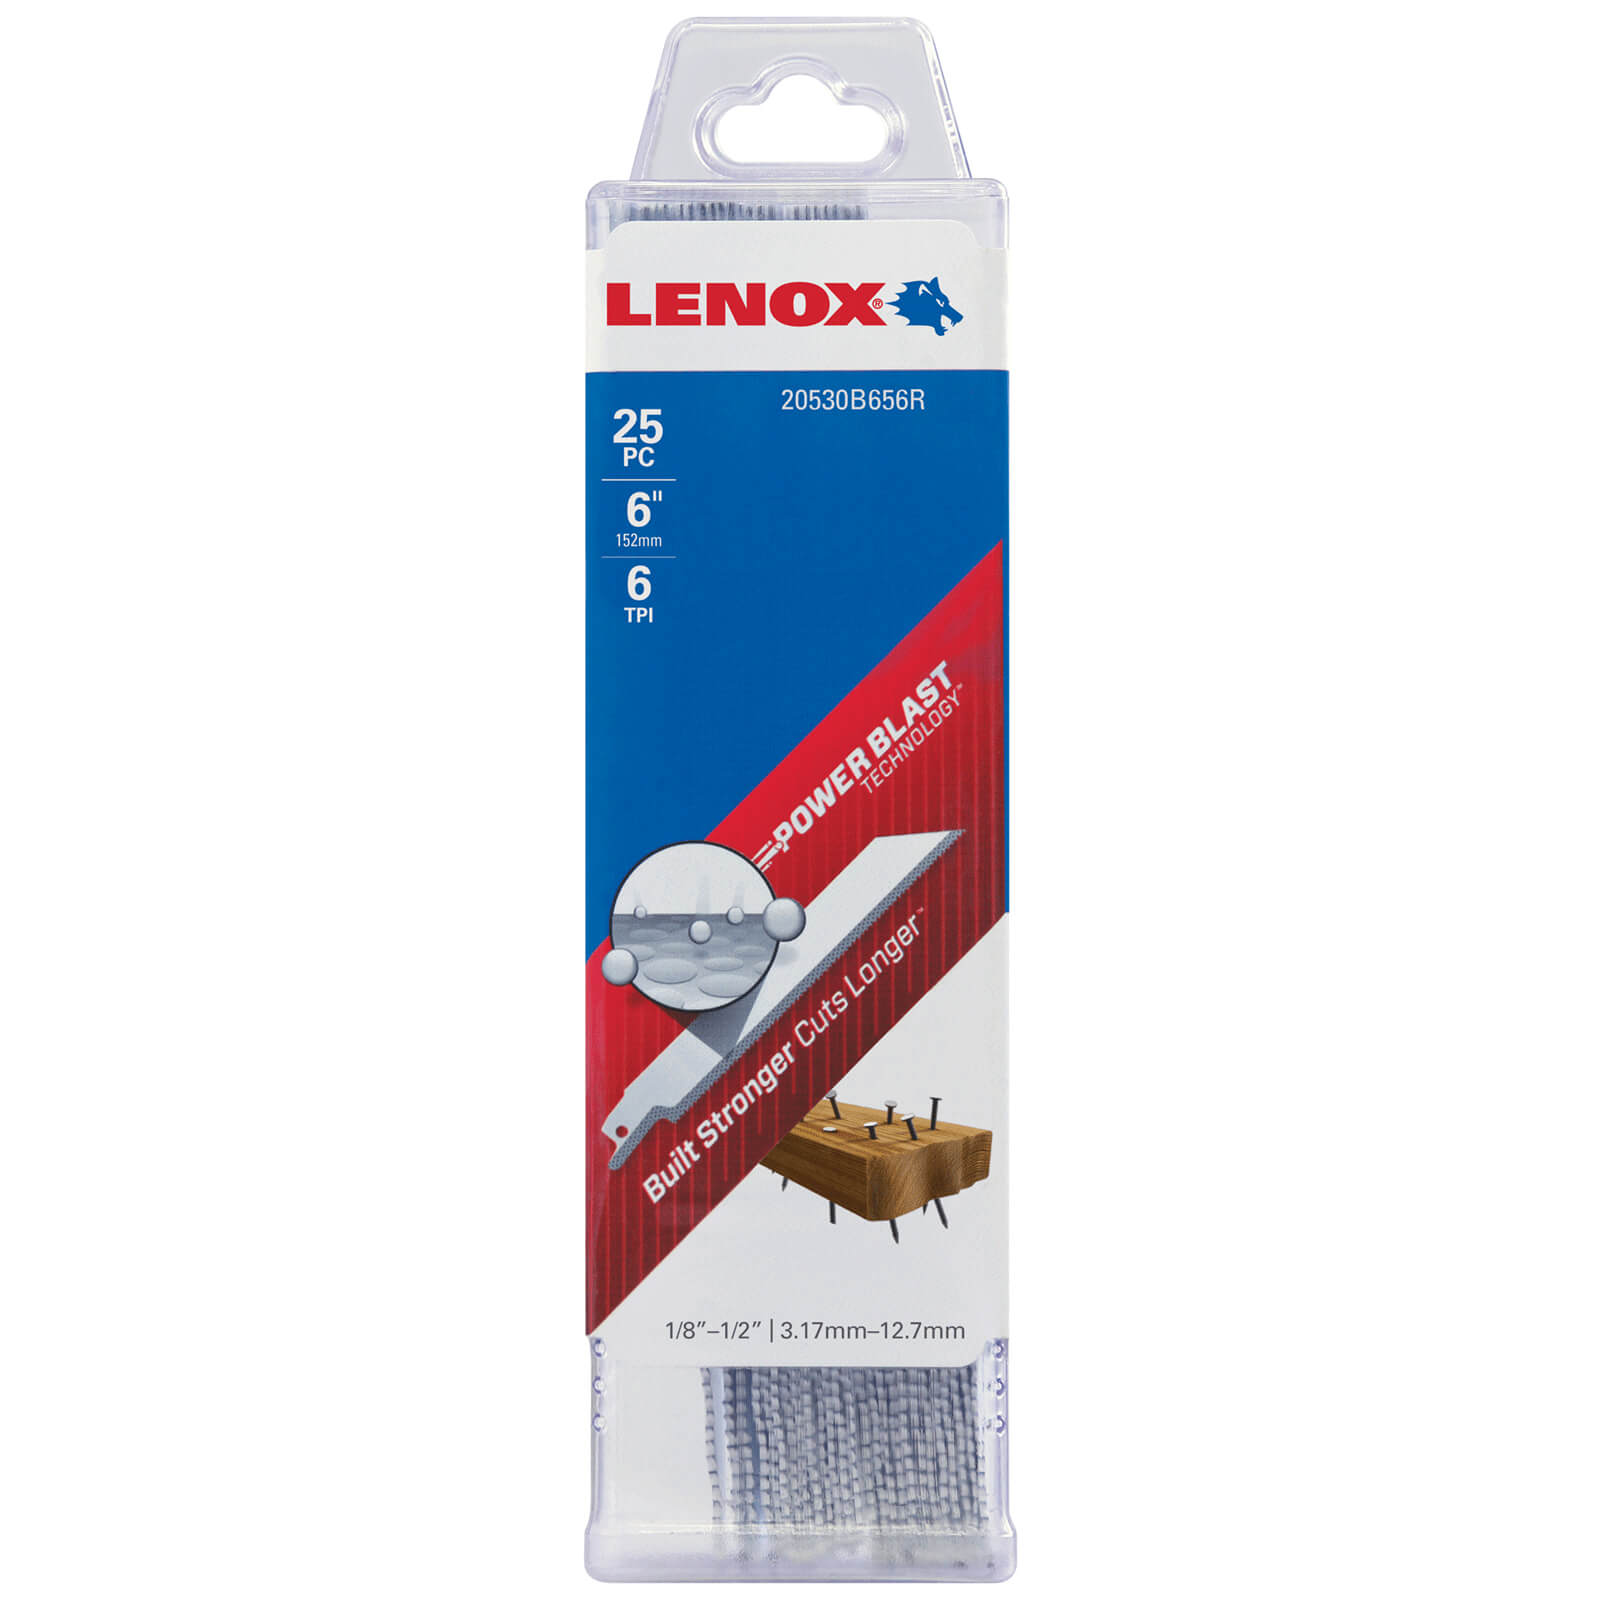 Photo of Lenox 6tpi Nail Embedded Wood Cutting Reciprocating Saw Blades 152mm Pack Of 25